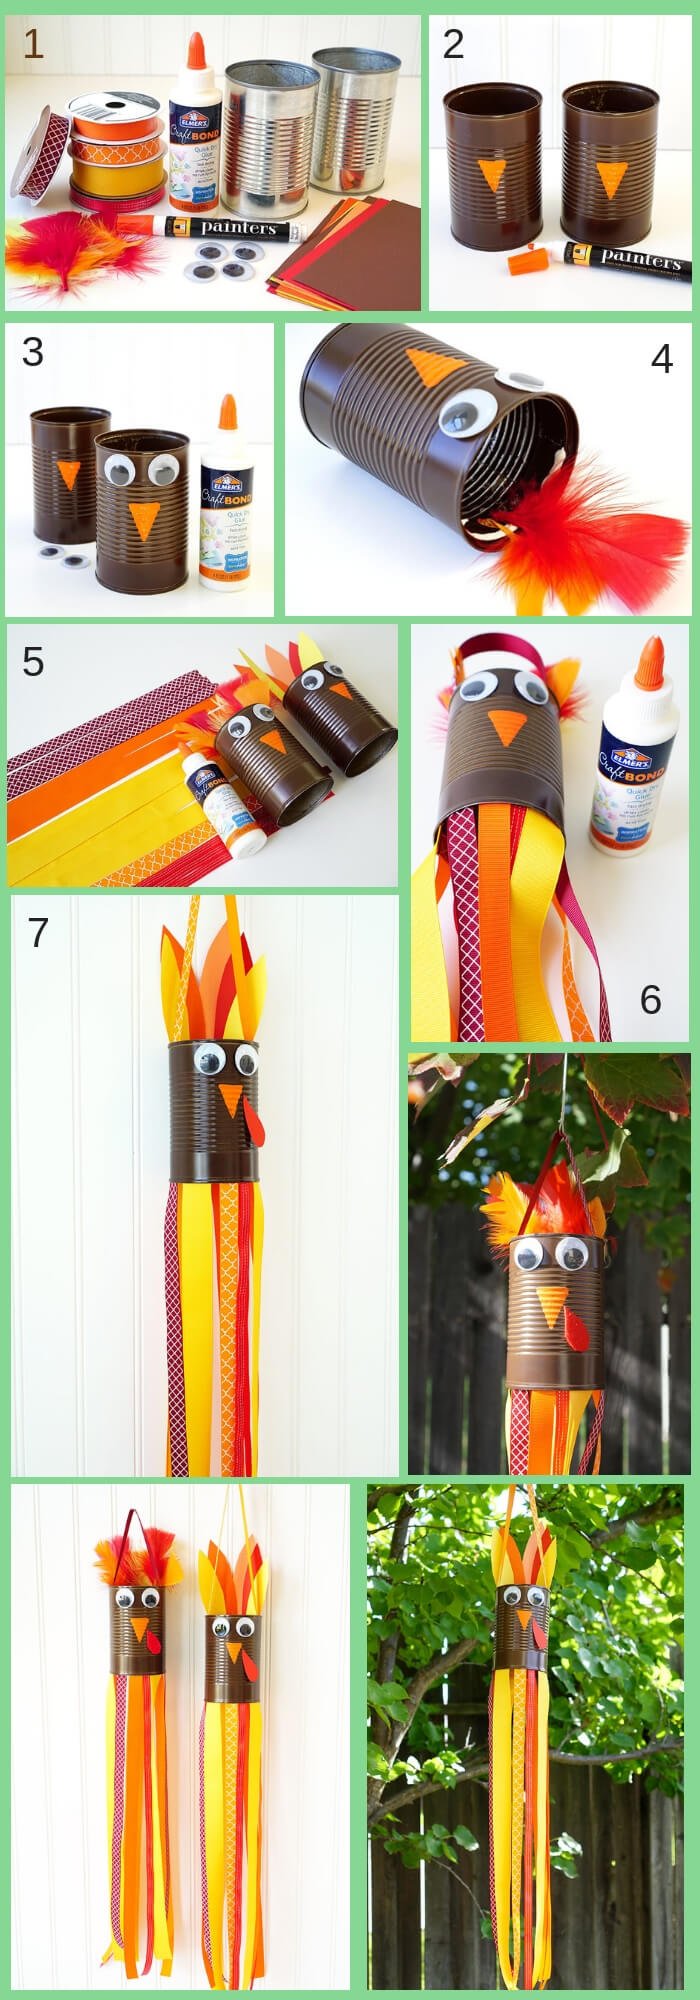 Turkey Windsocks | Simple Ideas for Kids' Crafts for Thanksgiving - FarmFoodFamily.com